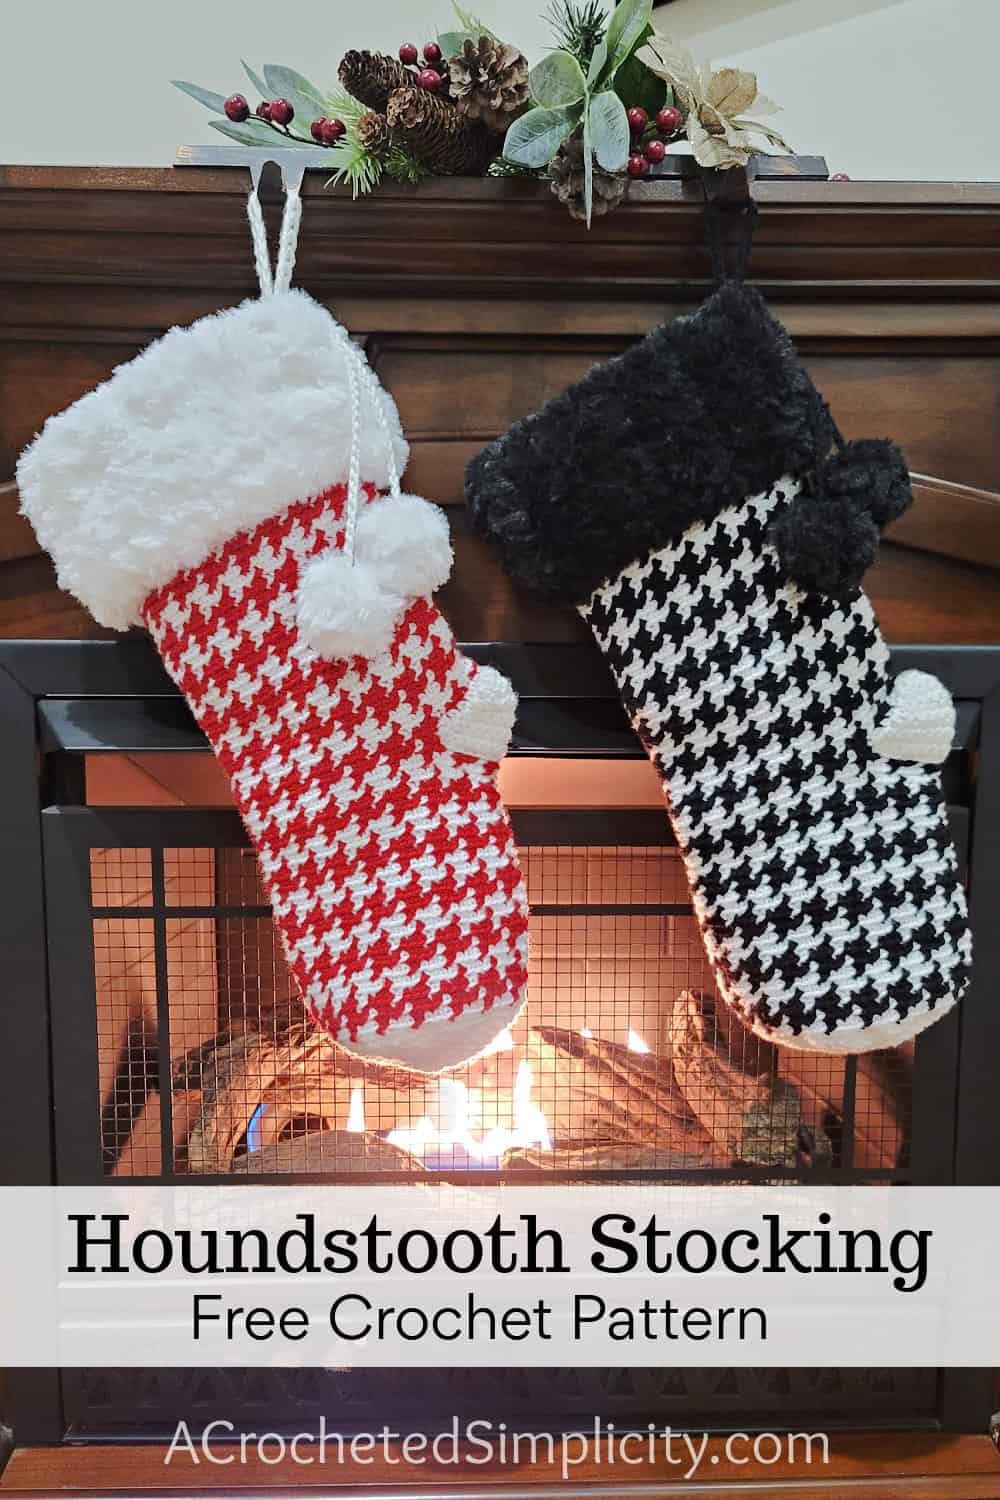 Free Crochet Stocking Pattern - Houndstooth Christmas Stocking by A Crocheted Simplicity #crochetcatherineswheel #crochetstocking #plaidstocking #farmhouseplaid #farmhousecrochet #crochetchristmas #crochetchristmasstocking #freecrochetpattern #crochet #handmadestocking #handmadechristmas #houndstooth #classichoundstooth #crochethoundstooth #houndstoothstocking 